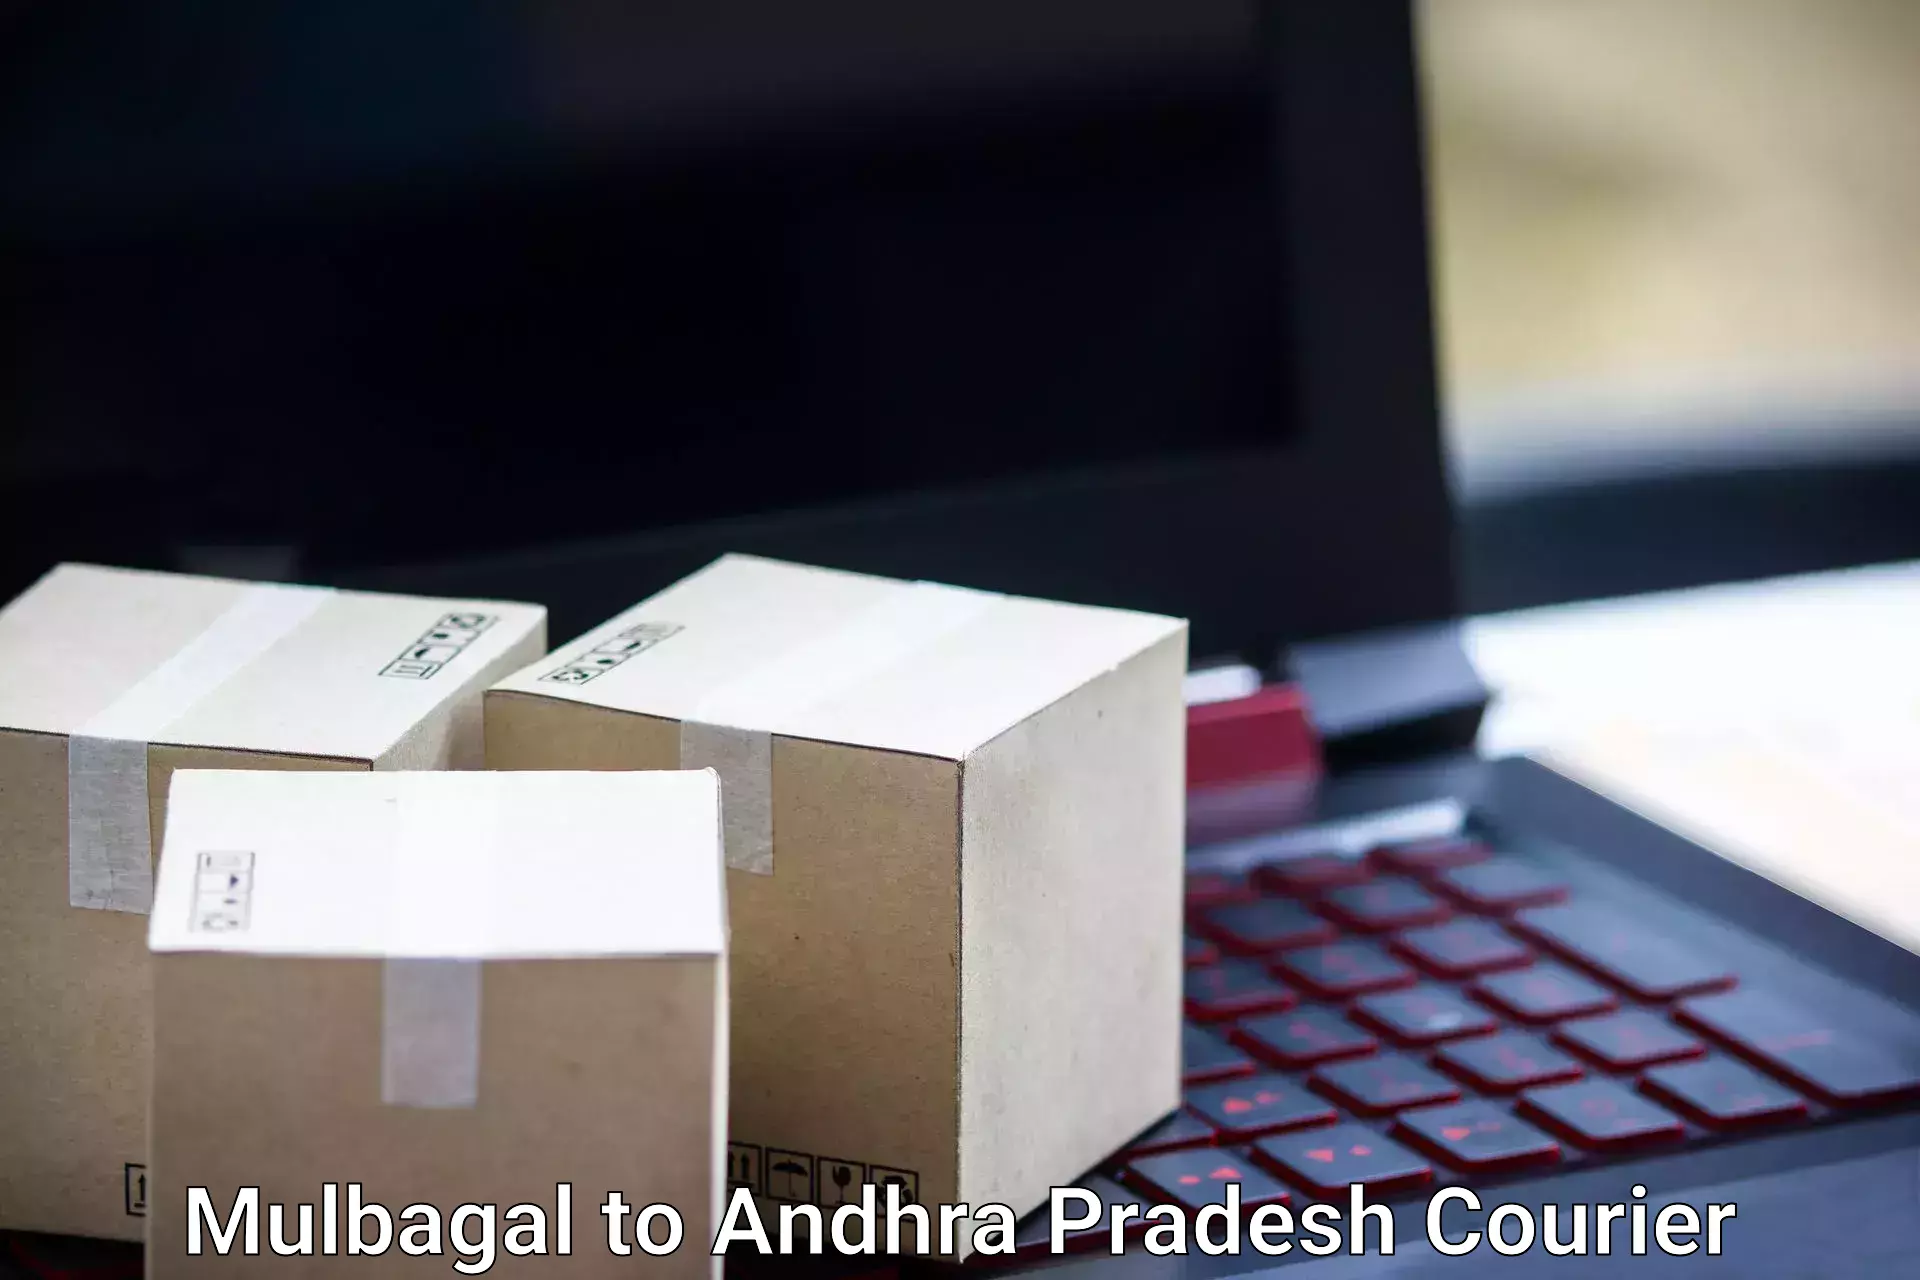 Luggage shipment specialists Mulbagal to Andhra Pradesh